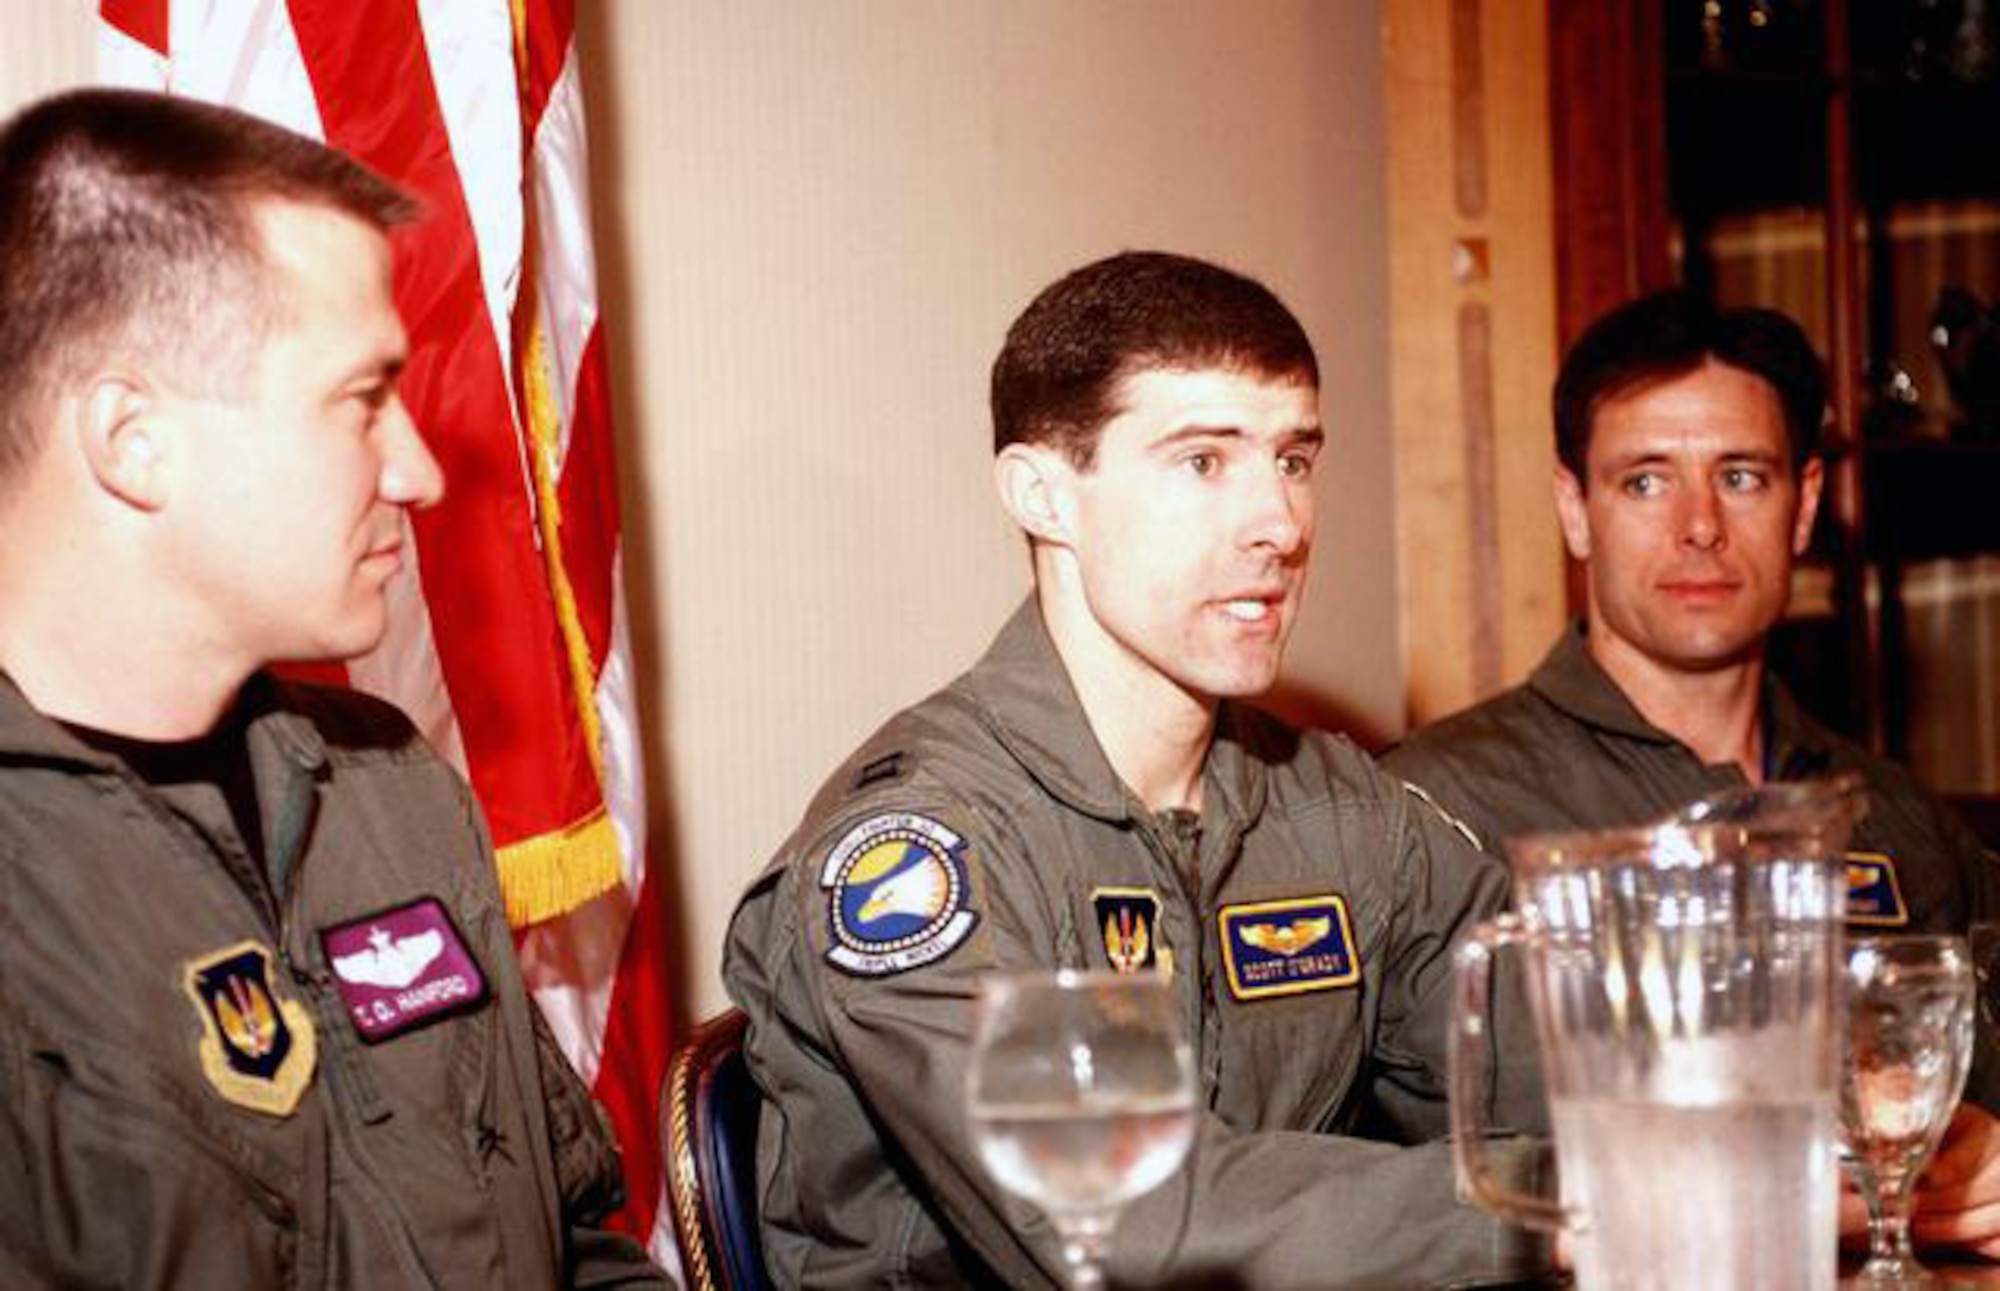 Capt. Scott O'Grady talks to Airmen from the 31st Fighter Wing at Aviano Air Base, Italy, about his experience after evading capture in 1995.  Capt. O'Grady, with the 555th Fighter Squadron at Aviano, ejected from his F-16 over Bosnia, after his aircraft was hit by a rocket from the Bosnian Serb Army. He eluded capture by Serbian forces for five days before being picked up by a U.S. Marine Corps rescue helicopter. (Courtesy photo)